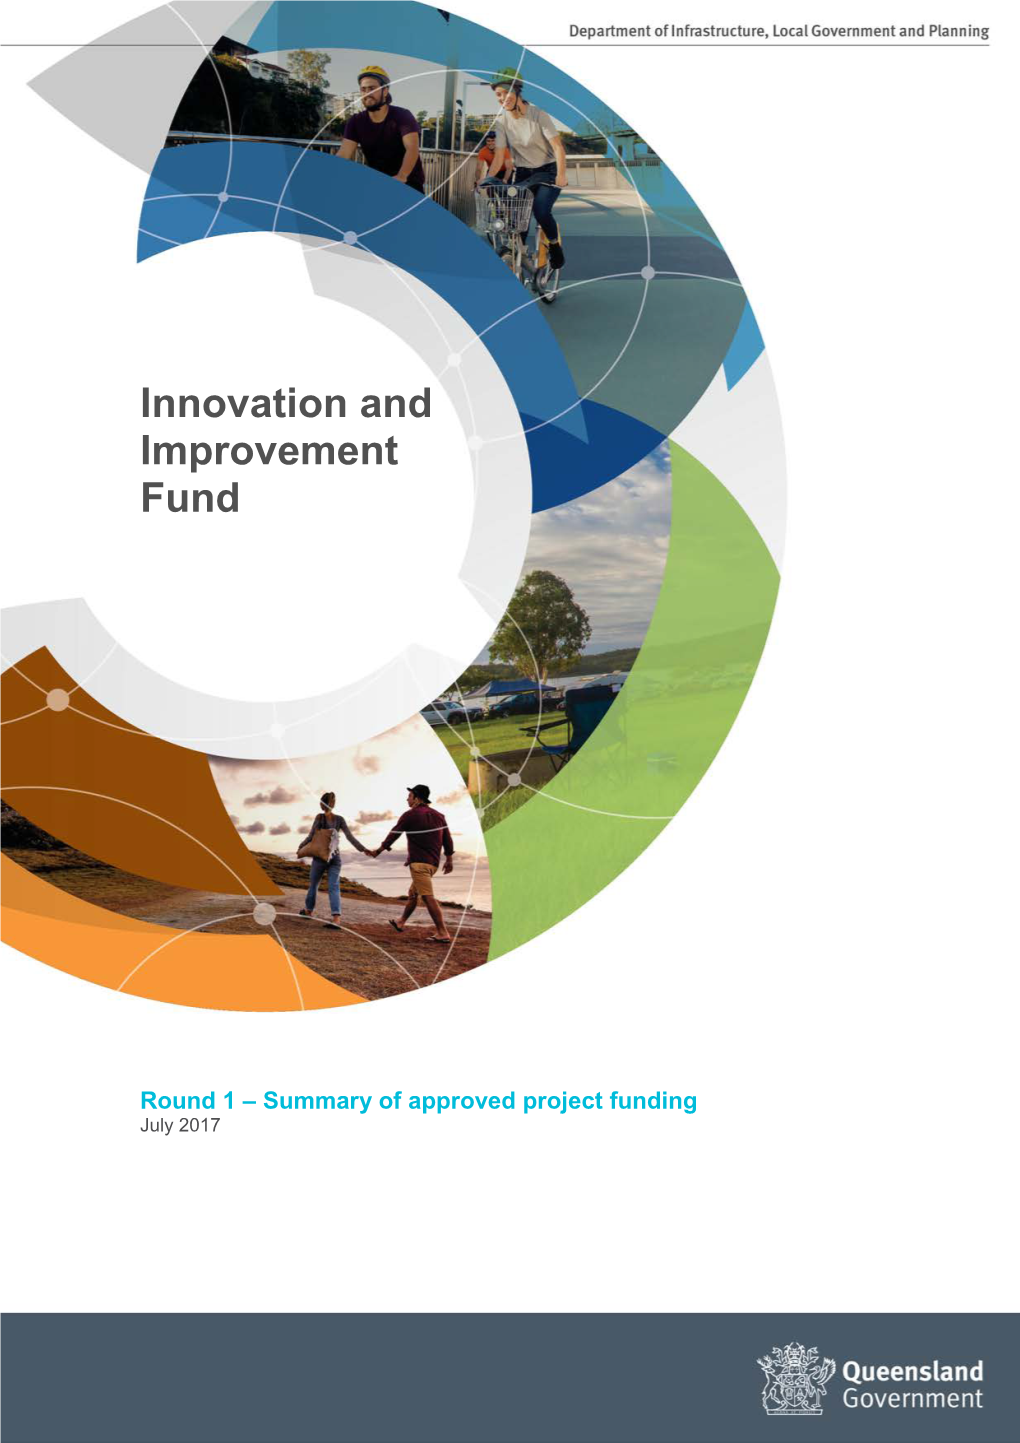 Innovation and Improvement Fund Round 1 – Summary of Approved Project Funding Page 2 of 7